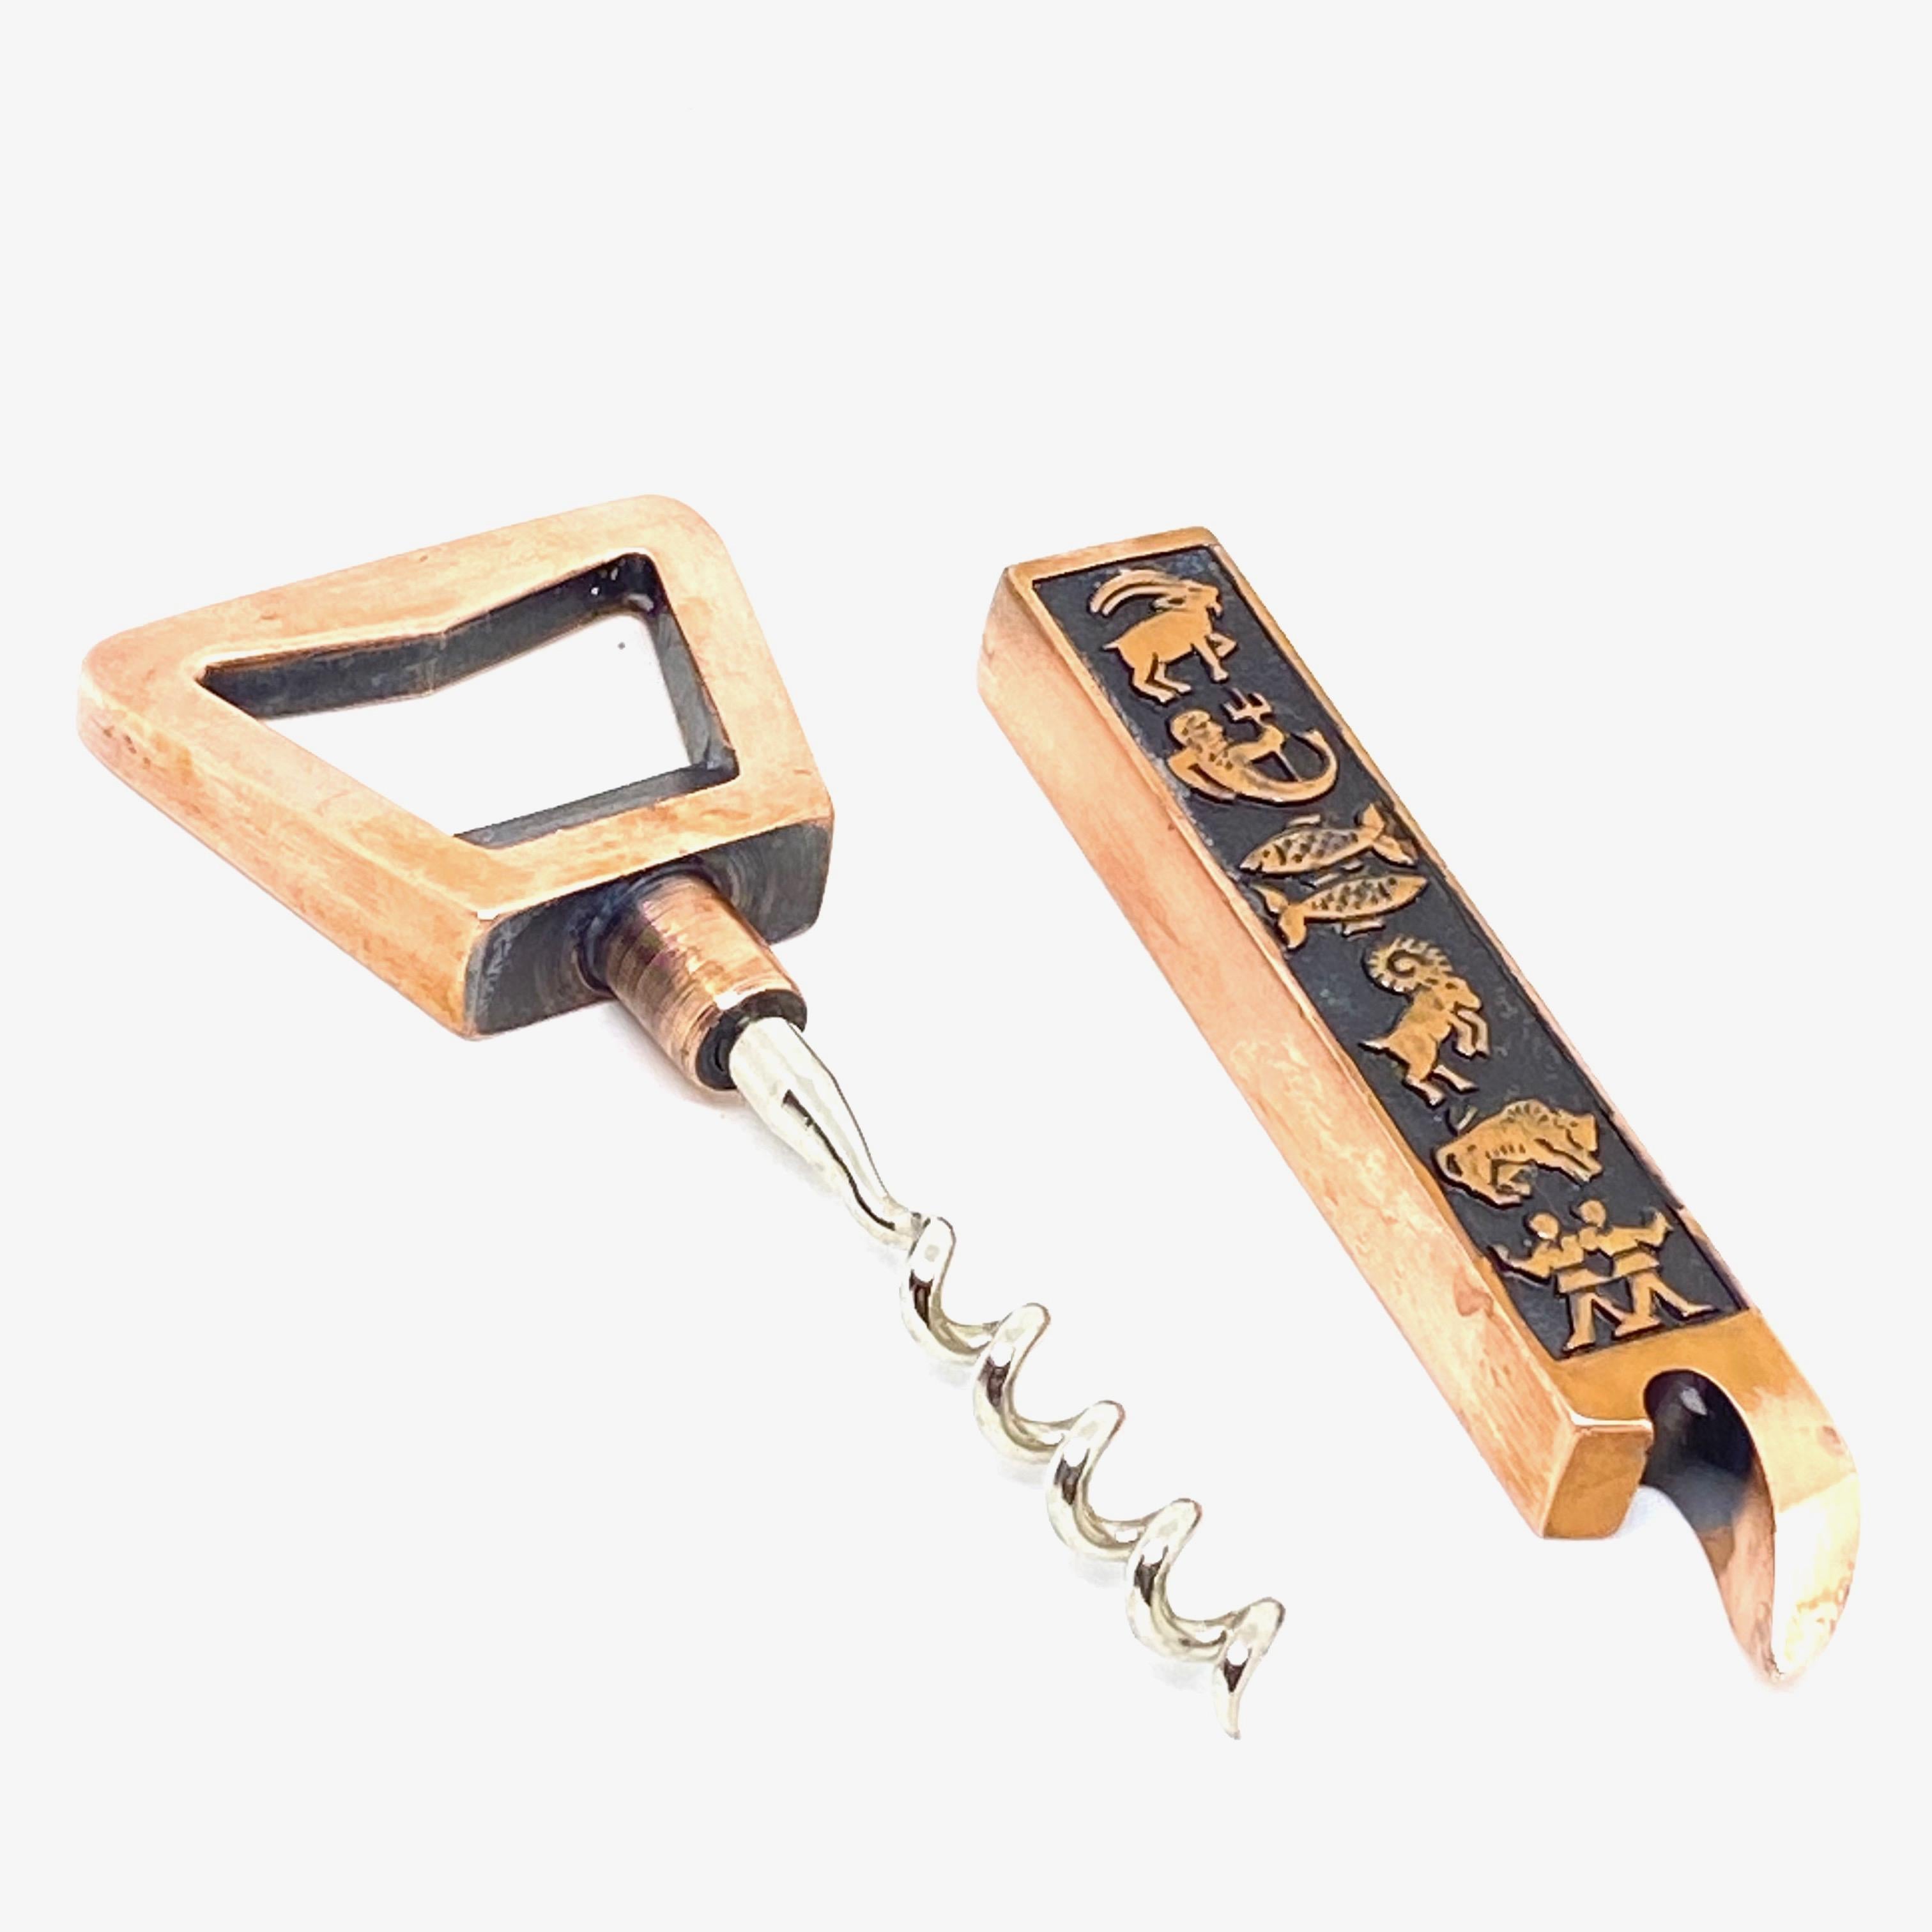 Metal Zodiac Sign Corkscrew and Bottle Opener, 1950s, Mid-Century Modern Collectible